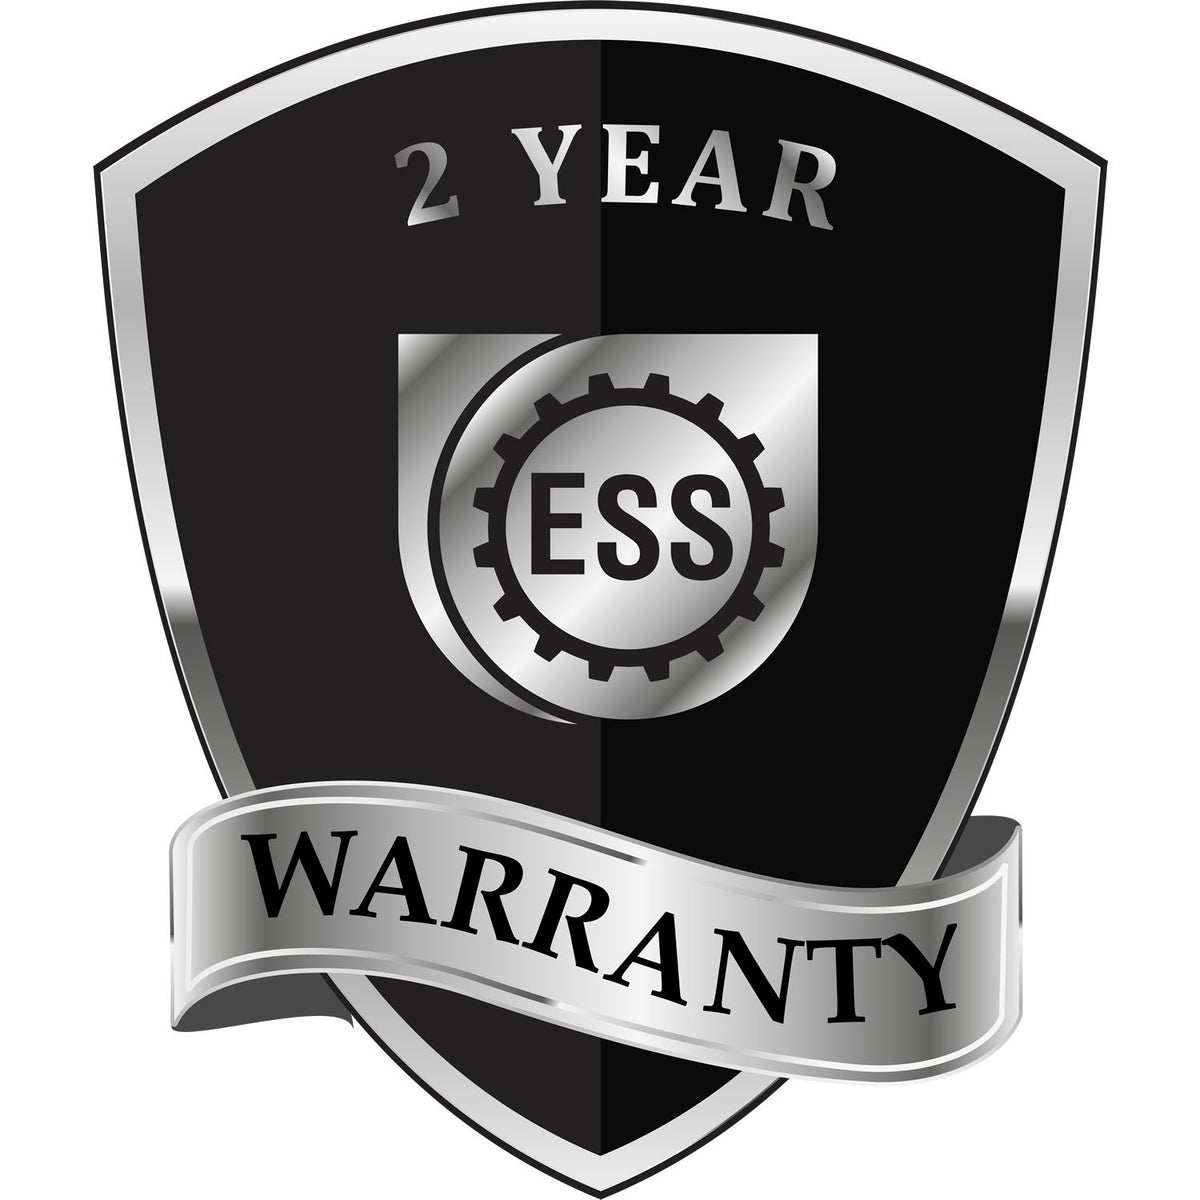 A black and silver badge or emblem showing warranty information for the Gift Tennessee Land Surveyor Seal